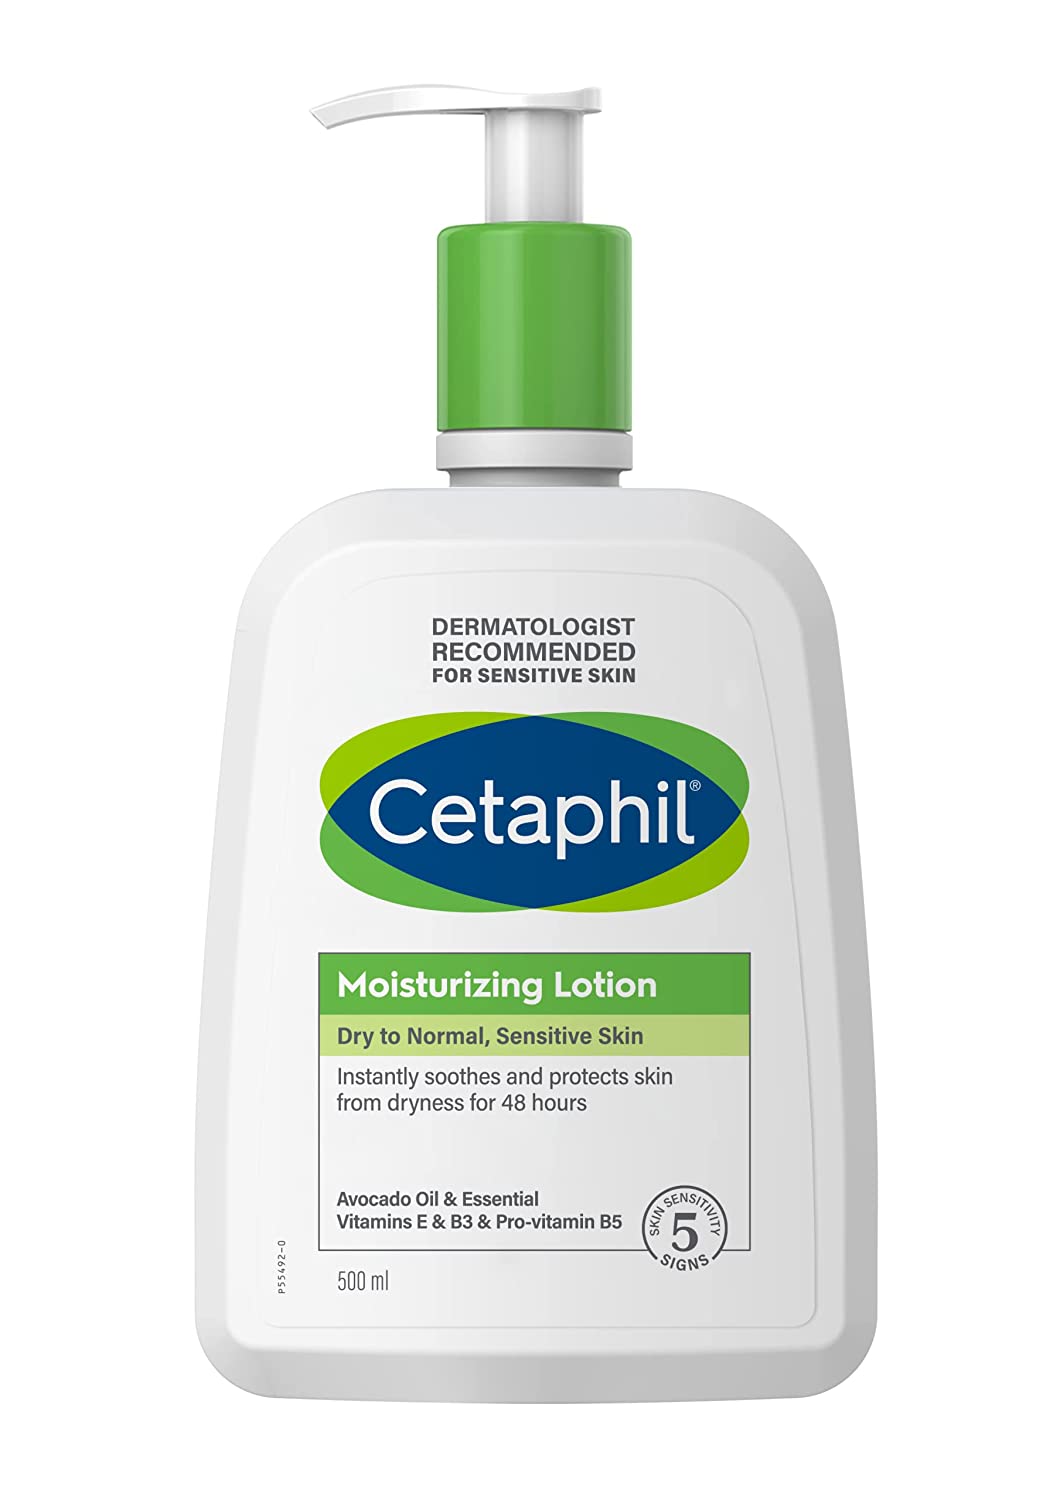 Cetaphil Moisturising Lotion for Face & Body, Normal to dry skin - 500 ml